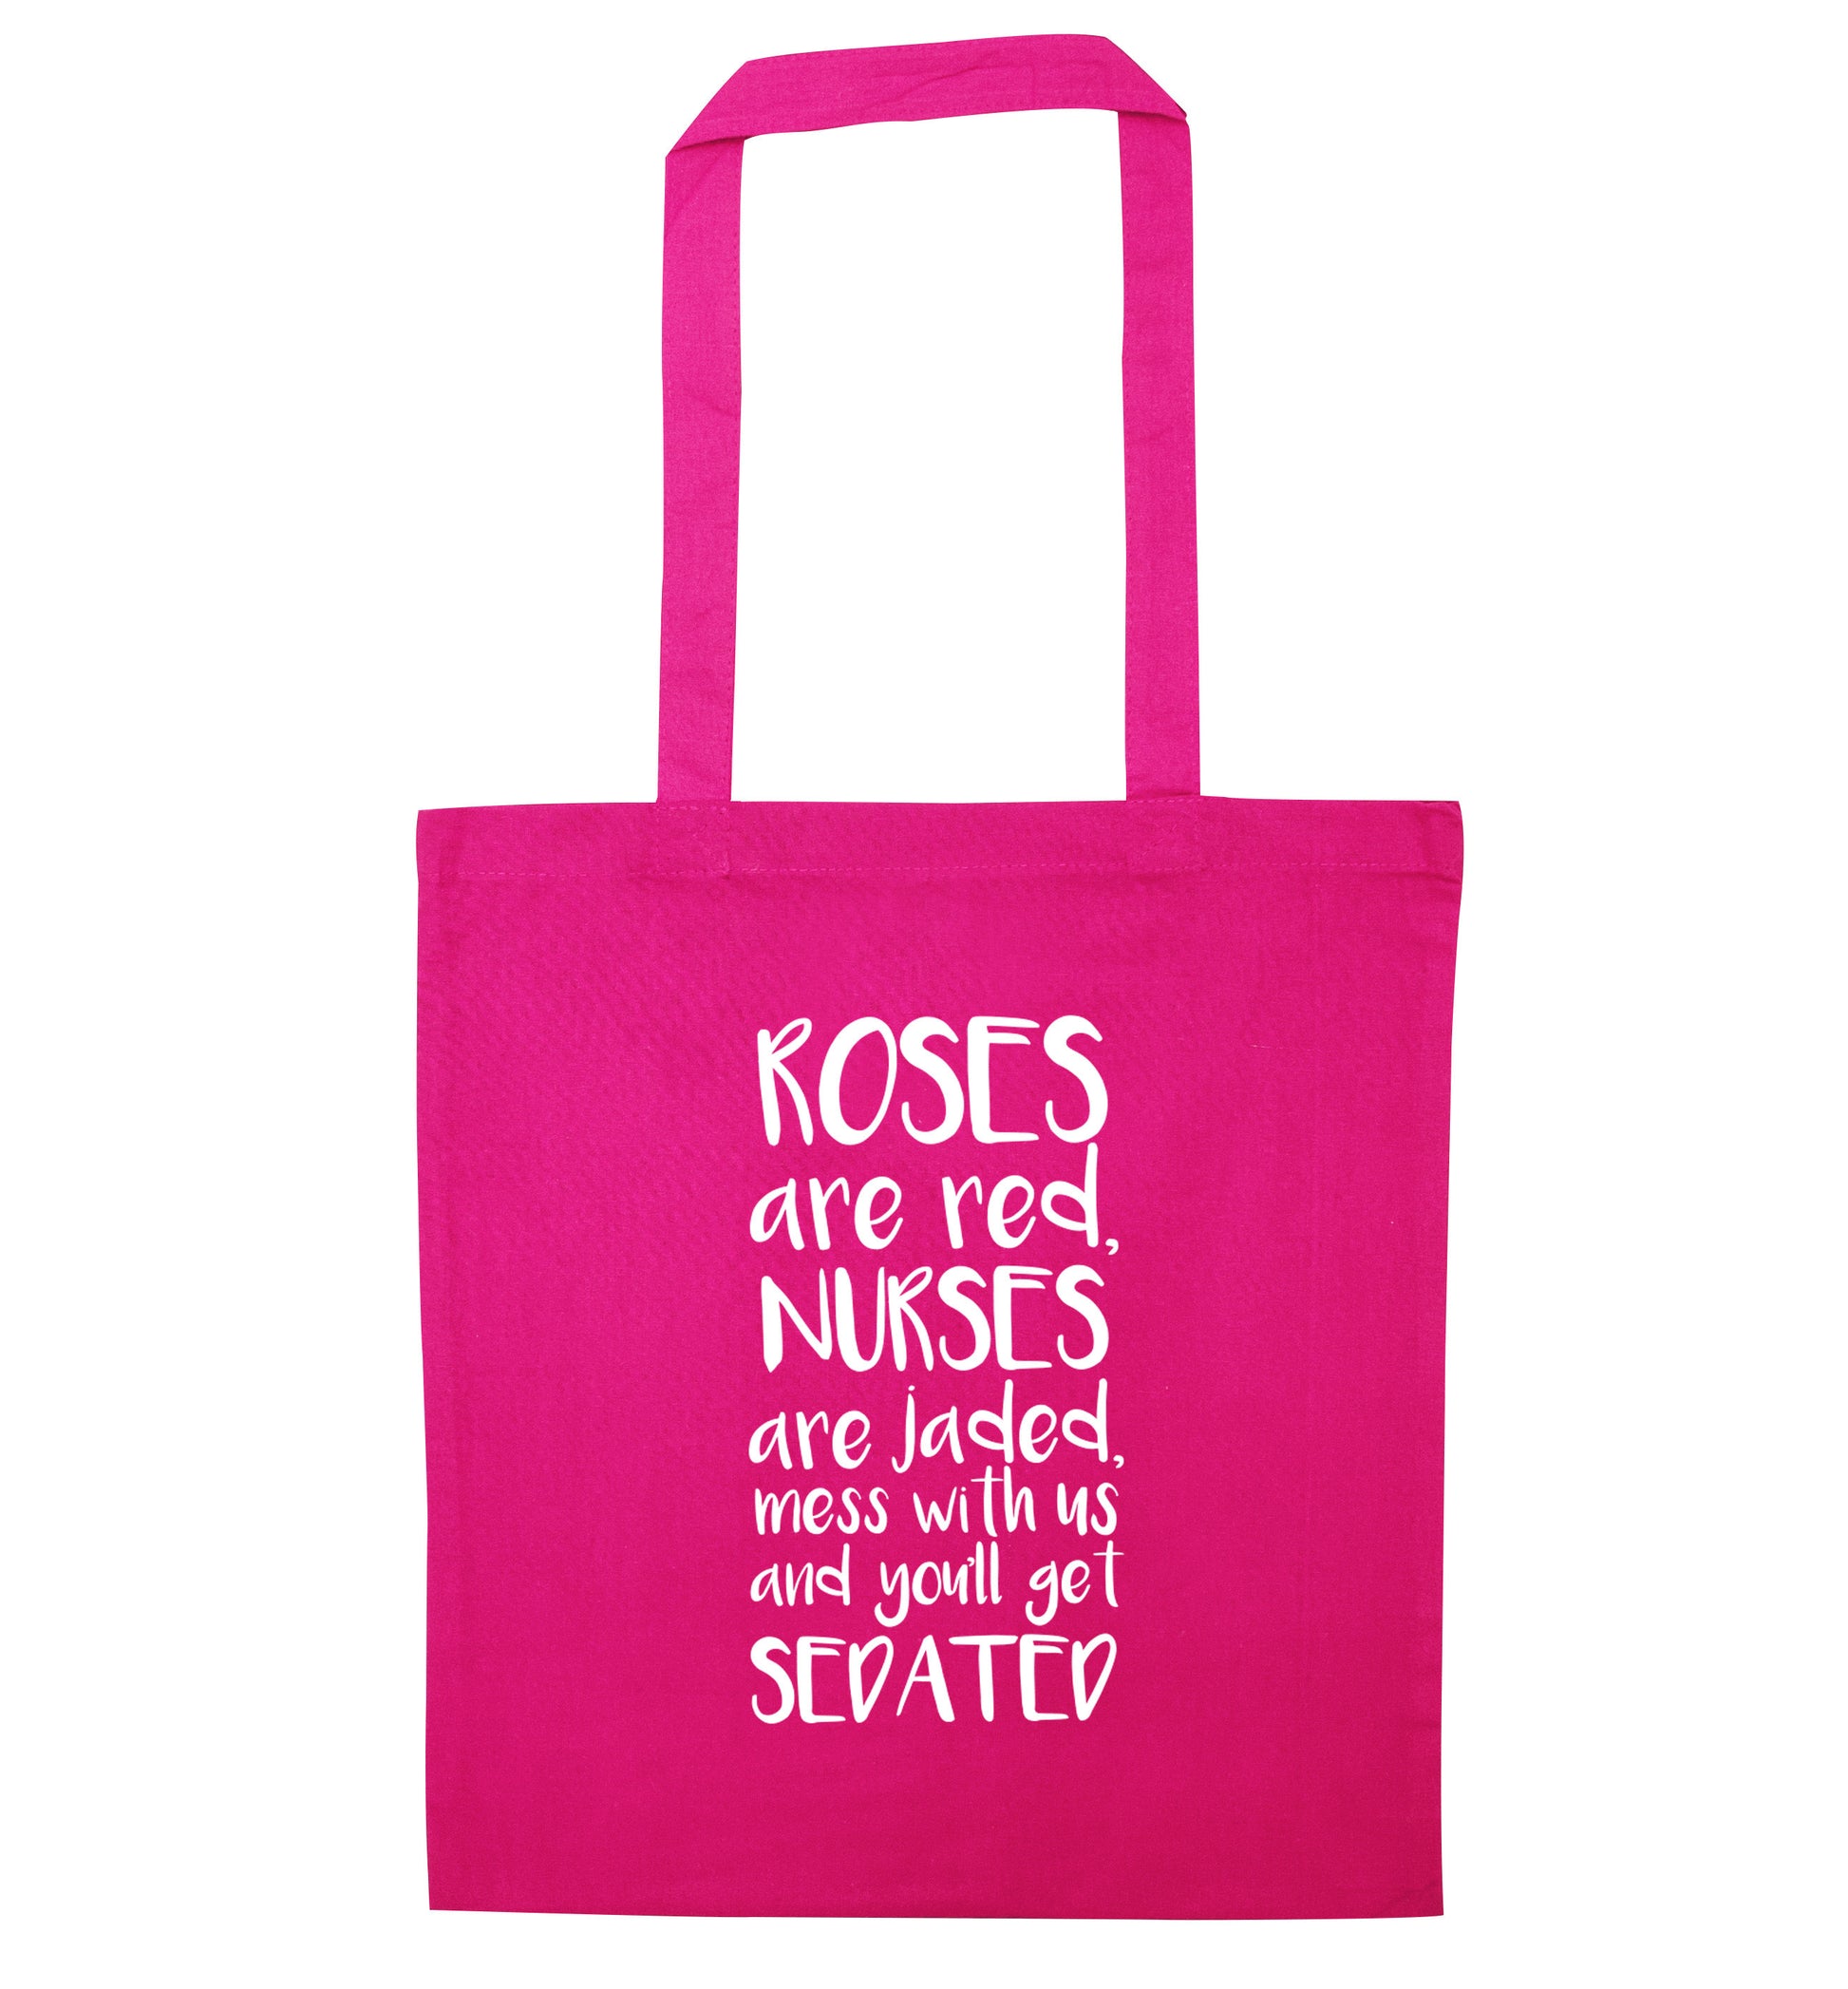 Roses are red, nurses are jaded, mess with us and you'll get sedated pink tote bag